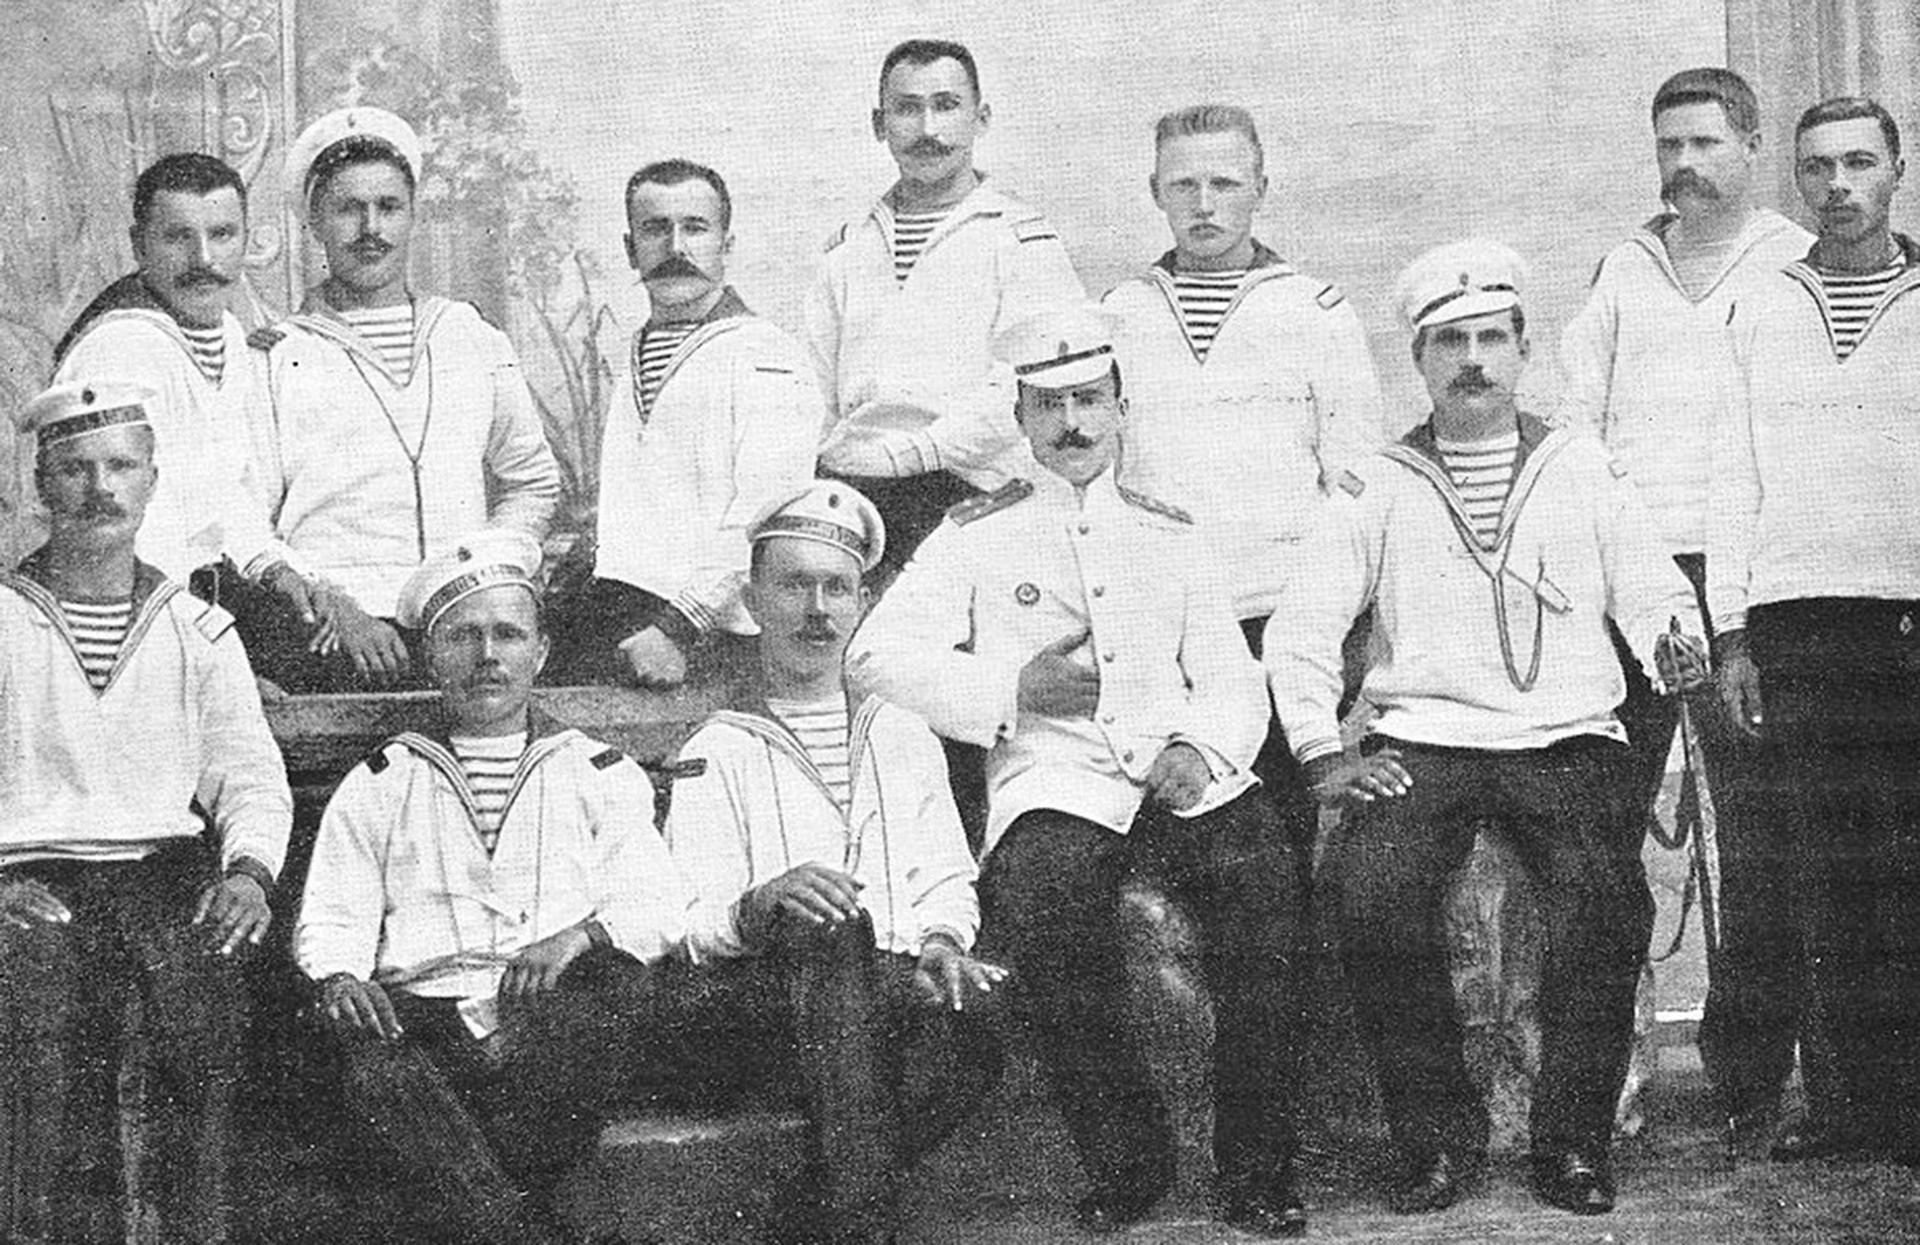 Some of the crew of the battleship Potemkin. The lieutenant in the center of the group was one of the officers killed by the rebels.